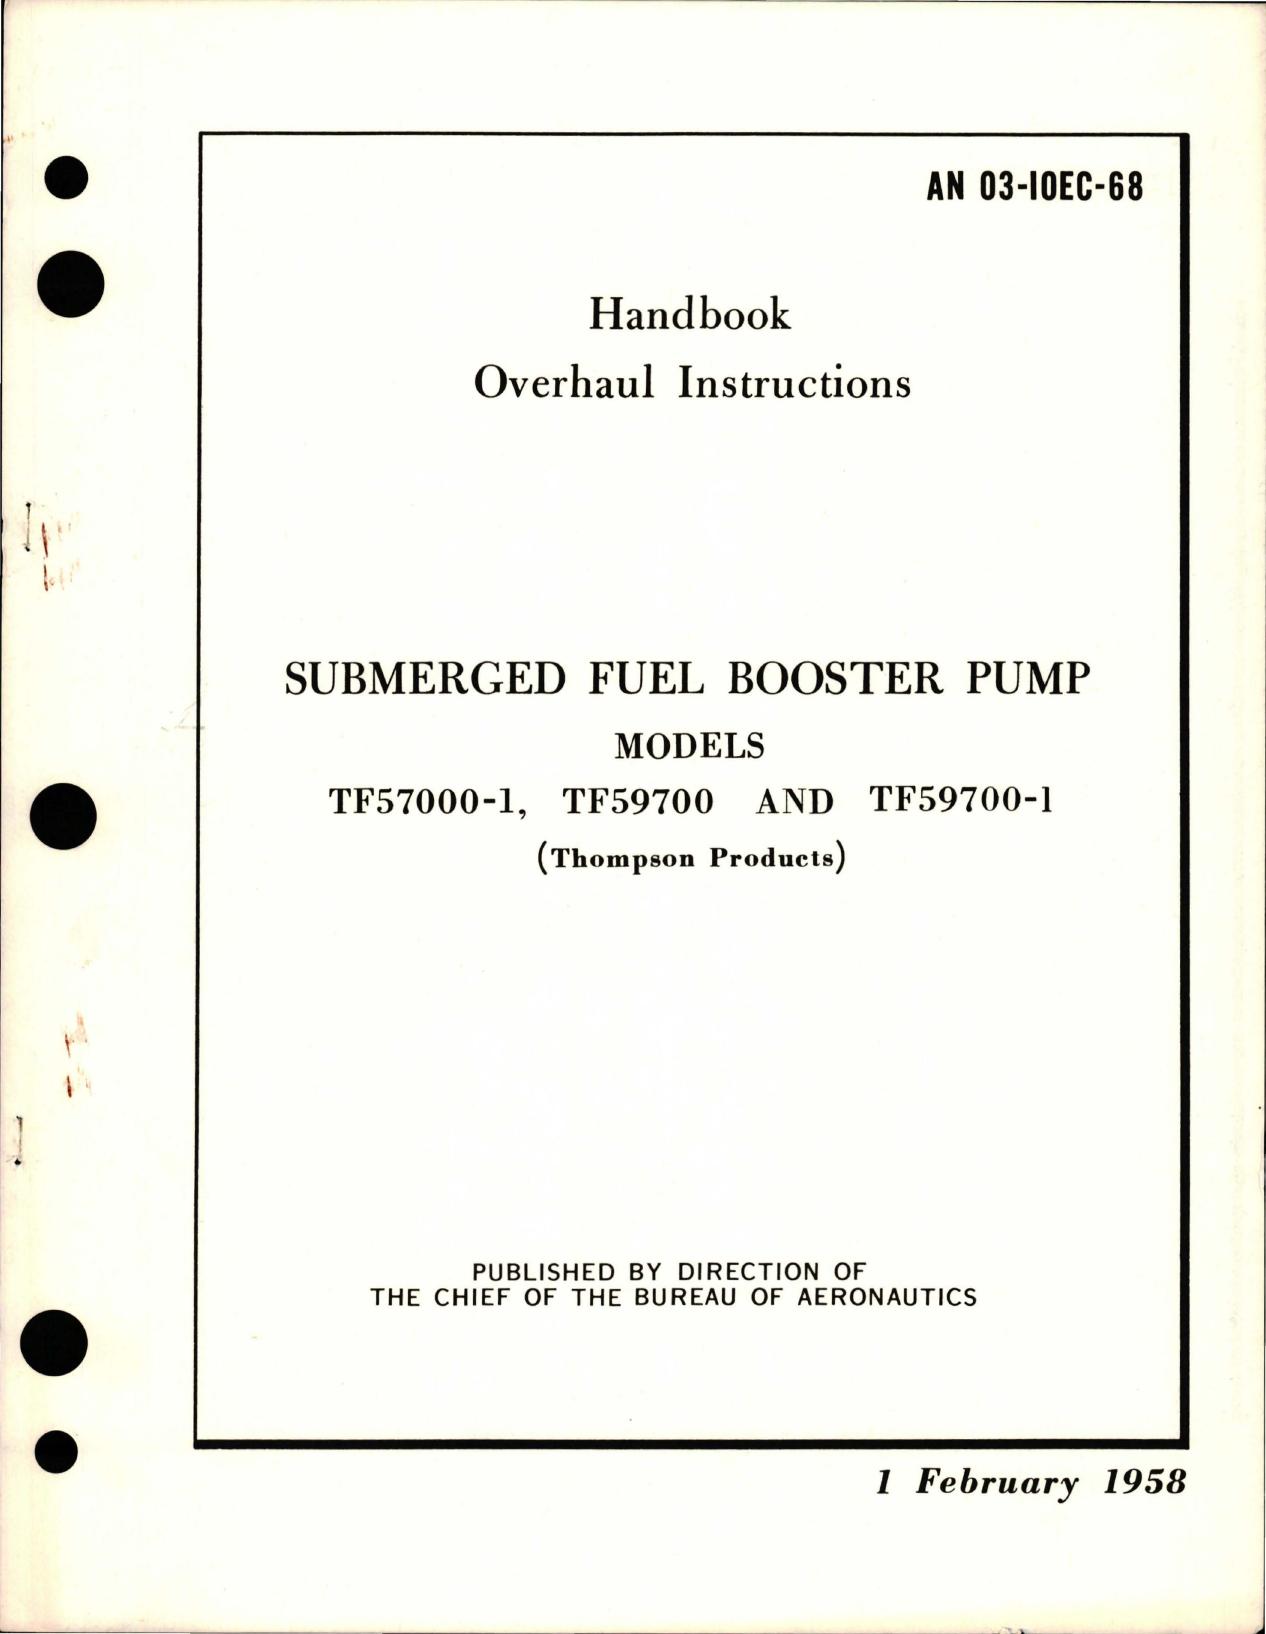 Sample page 1 from AirCorps Library document: Overhaul Instructions for Submerged Fuel Booster Pump - TF57000-1, TF59700 and TF59700-1 